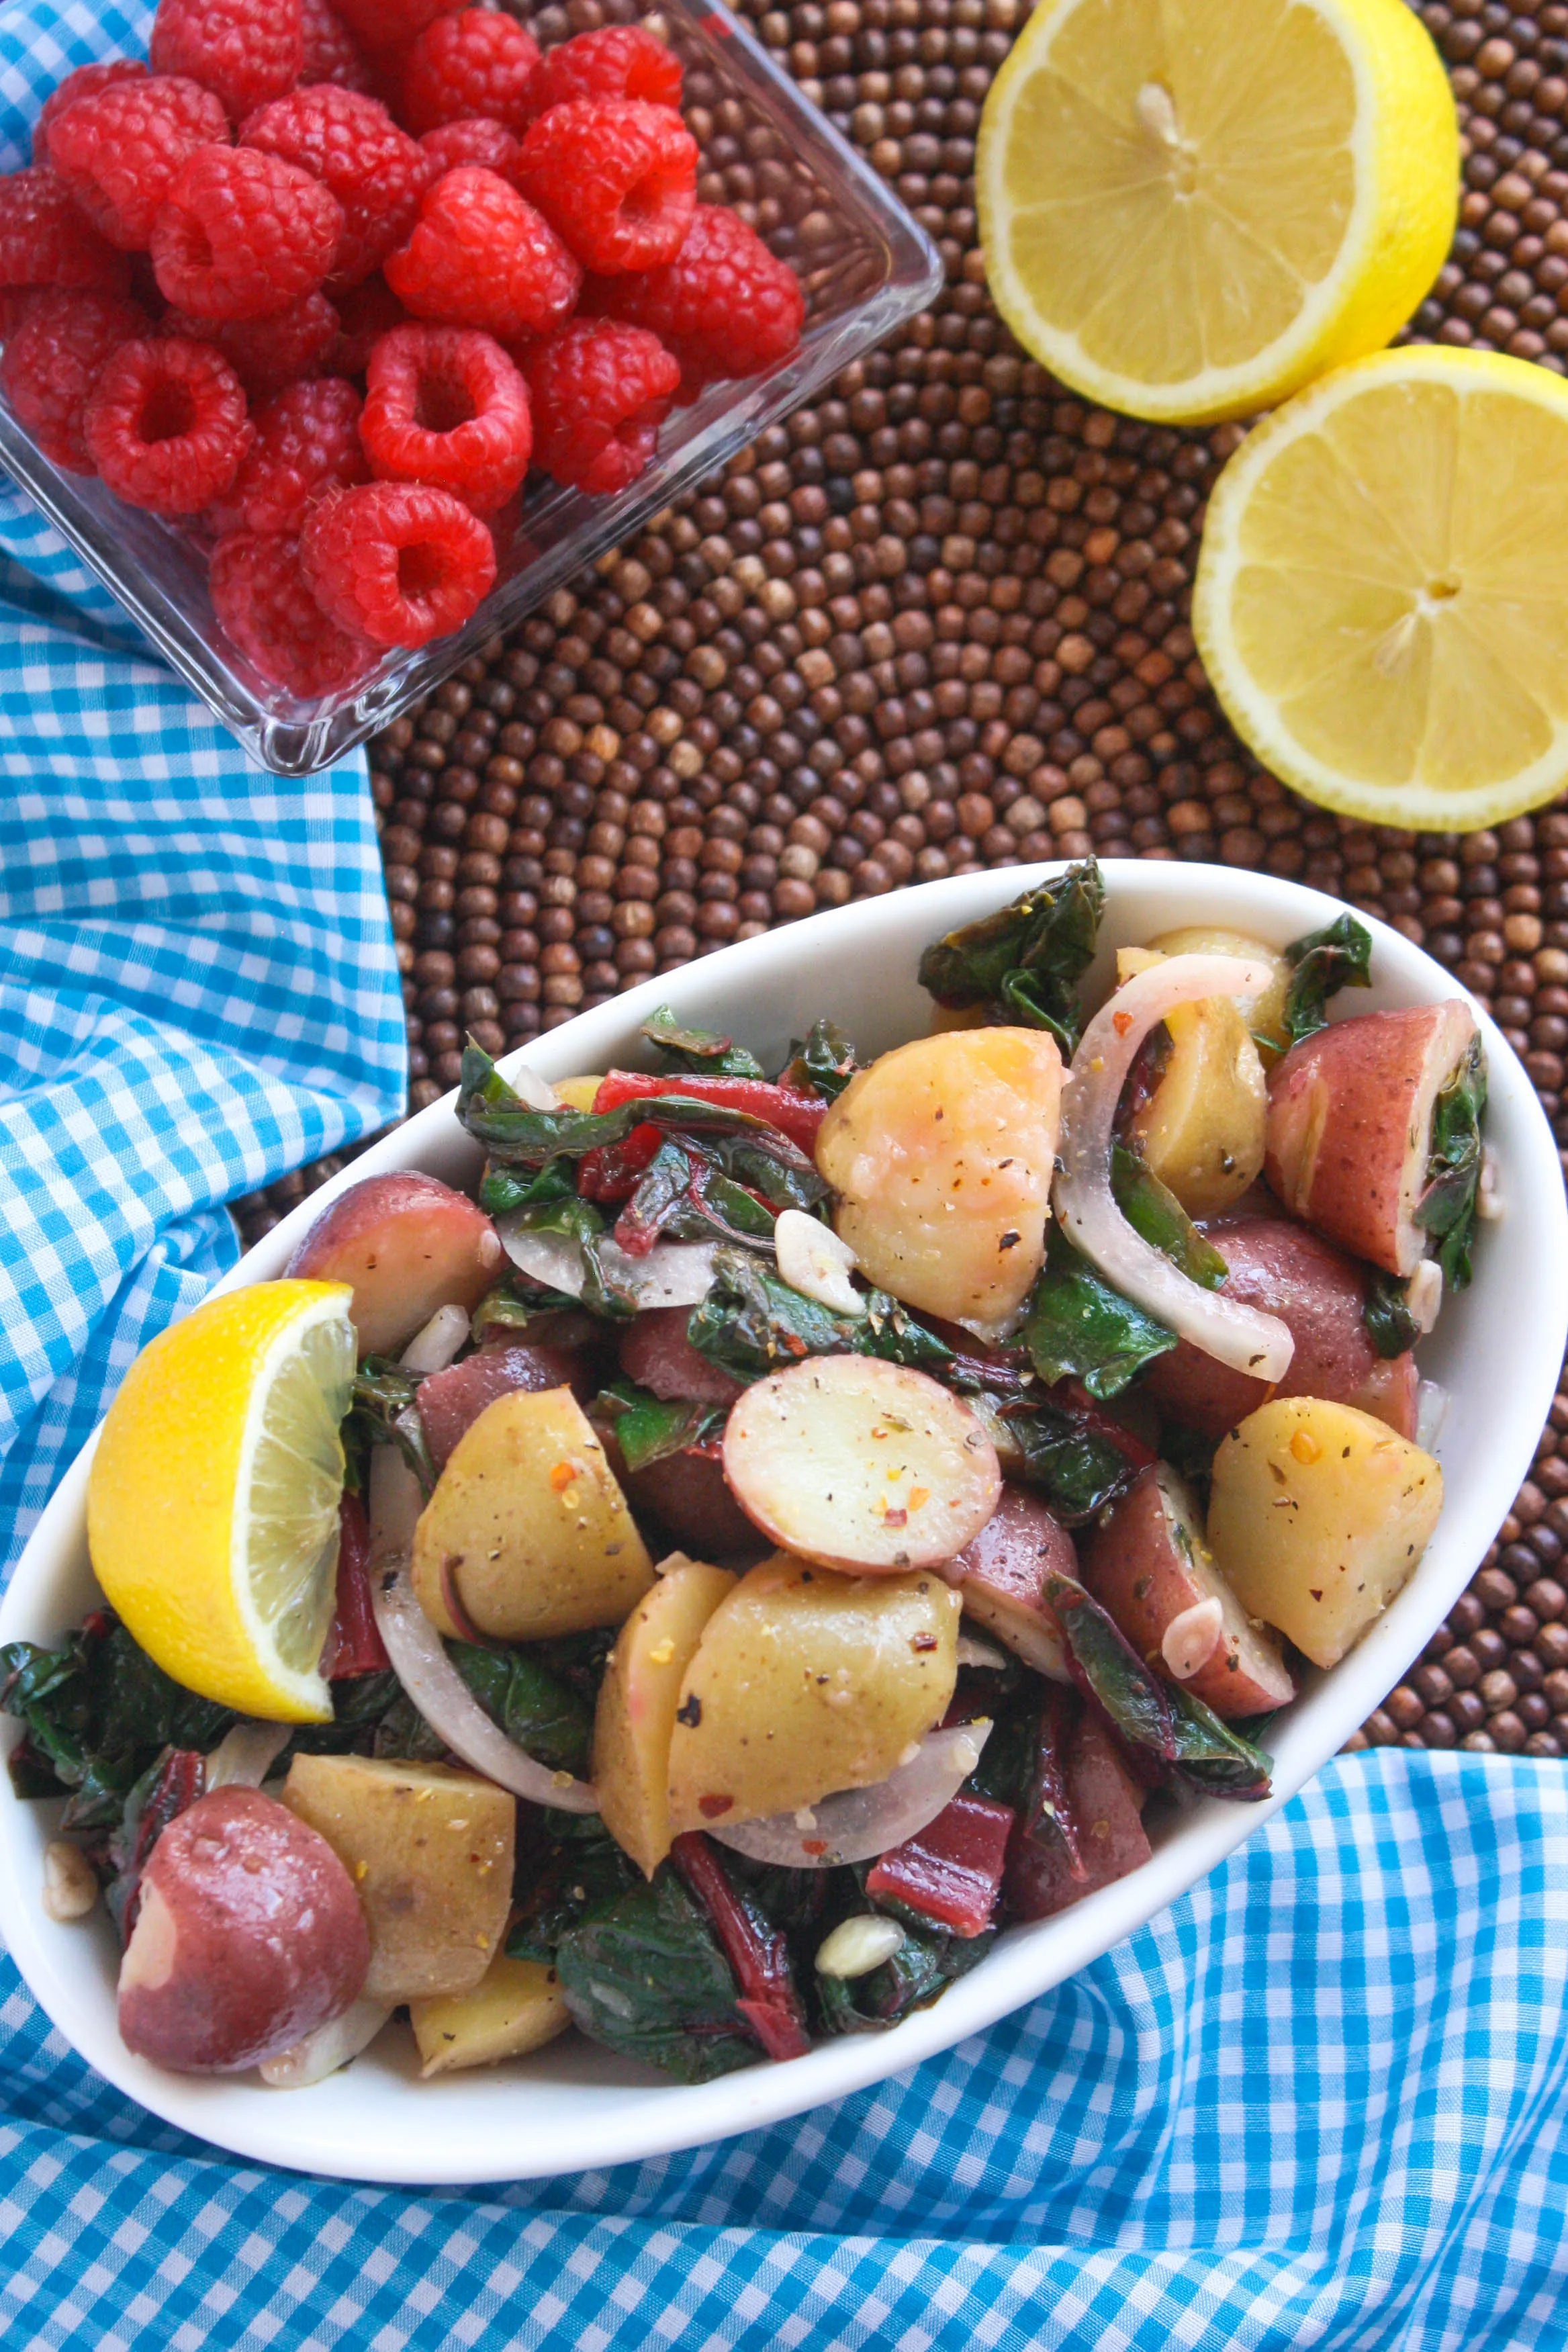 Italian Potato Salad with Swiss Chard is a flavorful side dish you'll want to make all summer. It's healthy take and fresh taste is amazing!